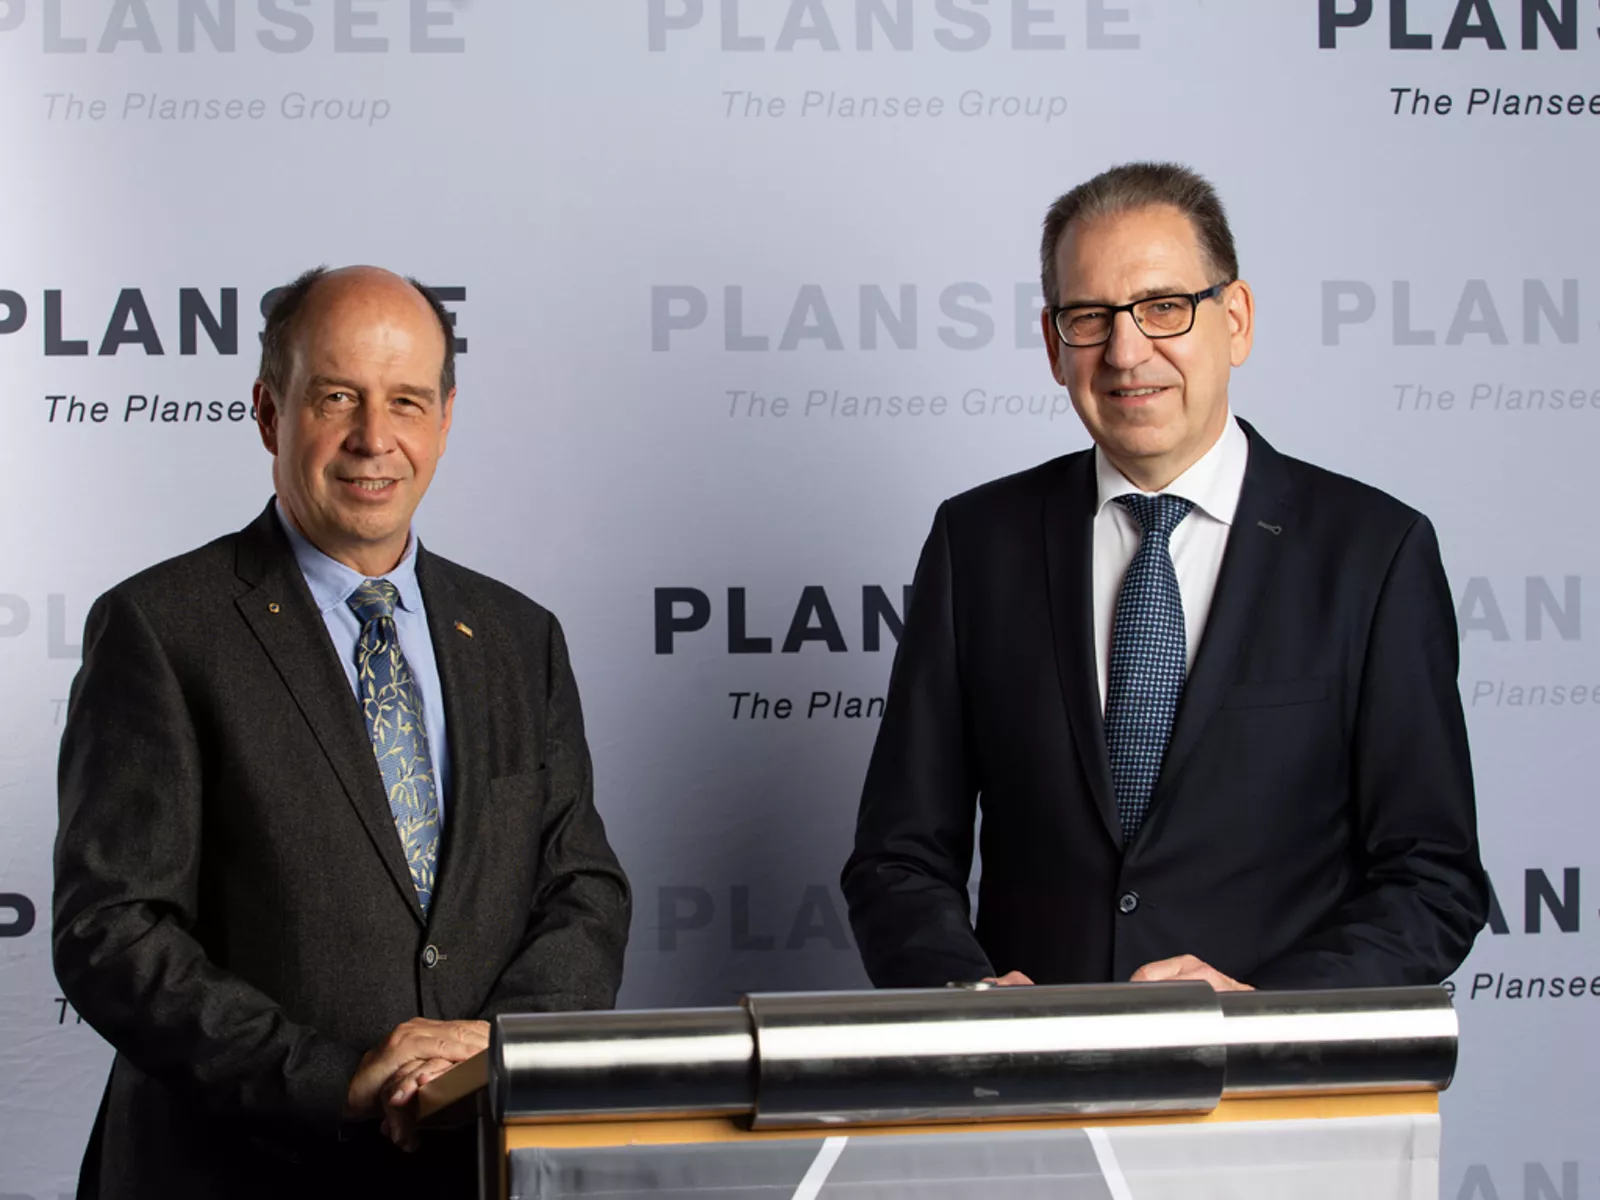 Plansee Group Executive Board